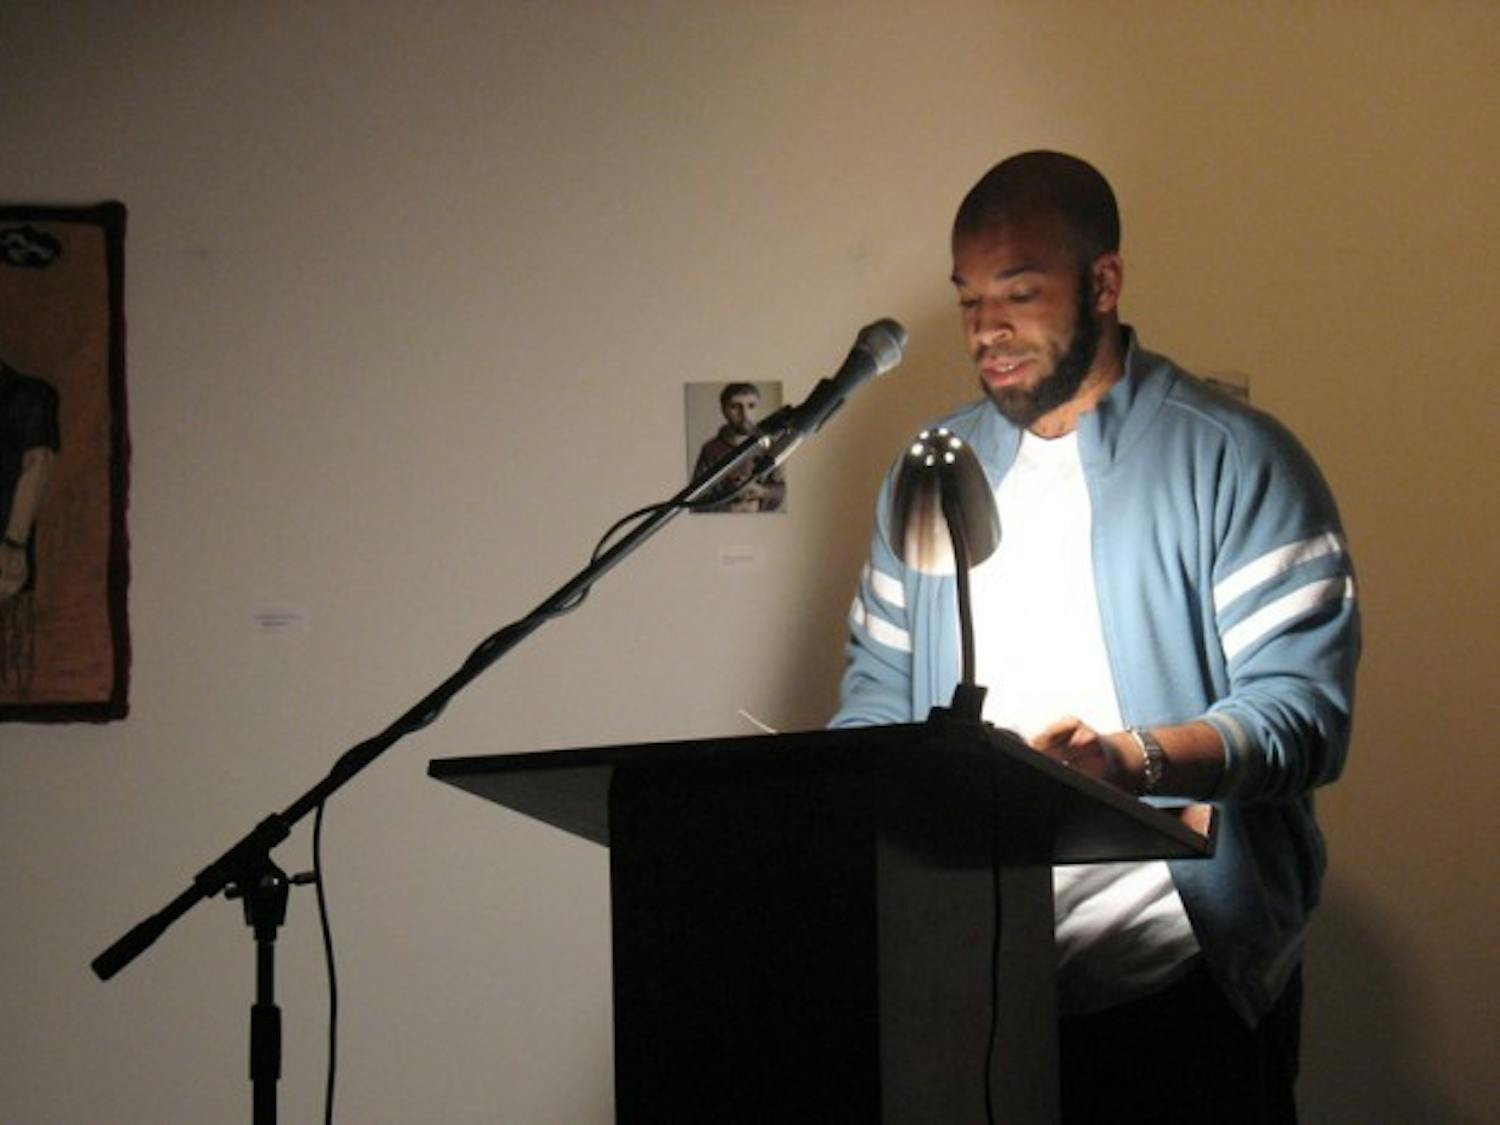 Douglas Kearney (pictured performing at the California Institute of the Arts) visited UB on Thursday. He kept audiences entertained as he read a collection of works dealing with his personal struggles and injustices throughout history.&nbsp;Courtesy of Flickr user Jason Brown